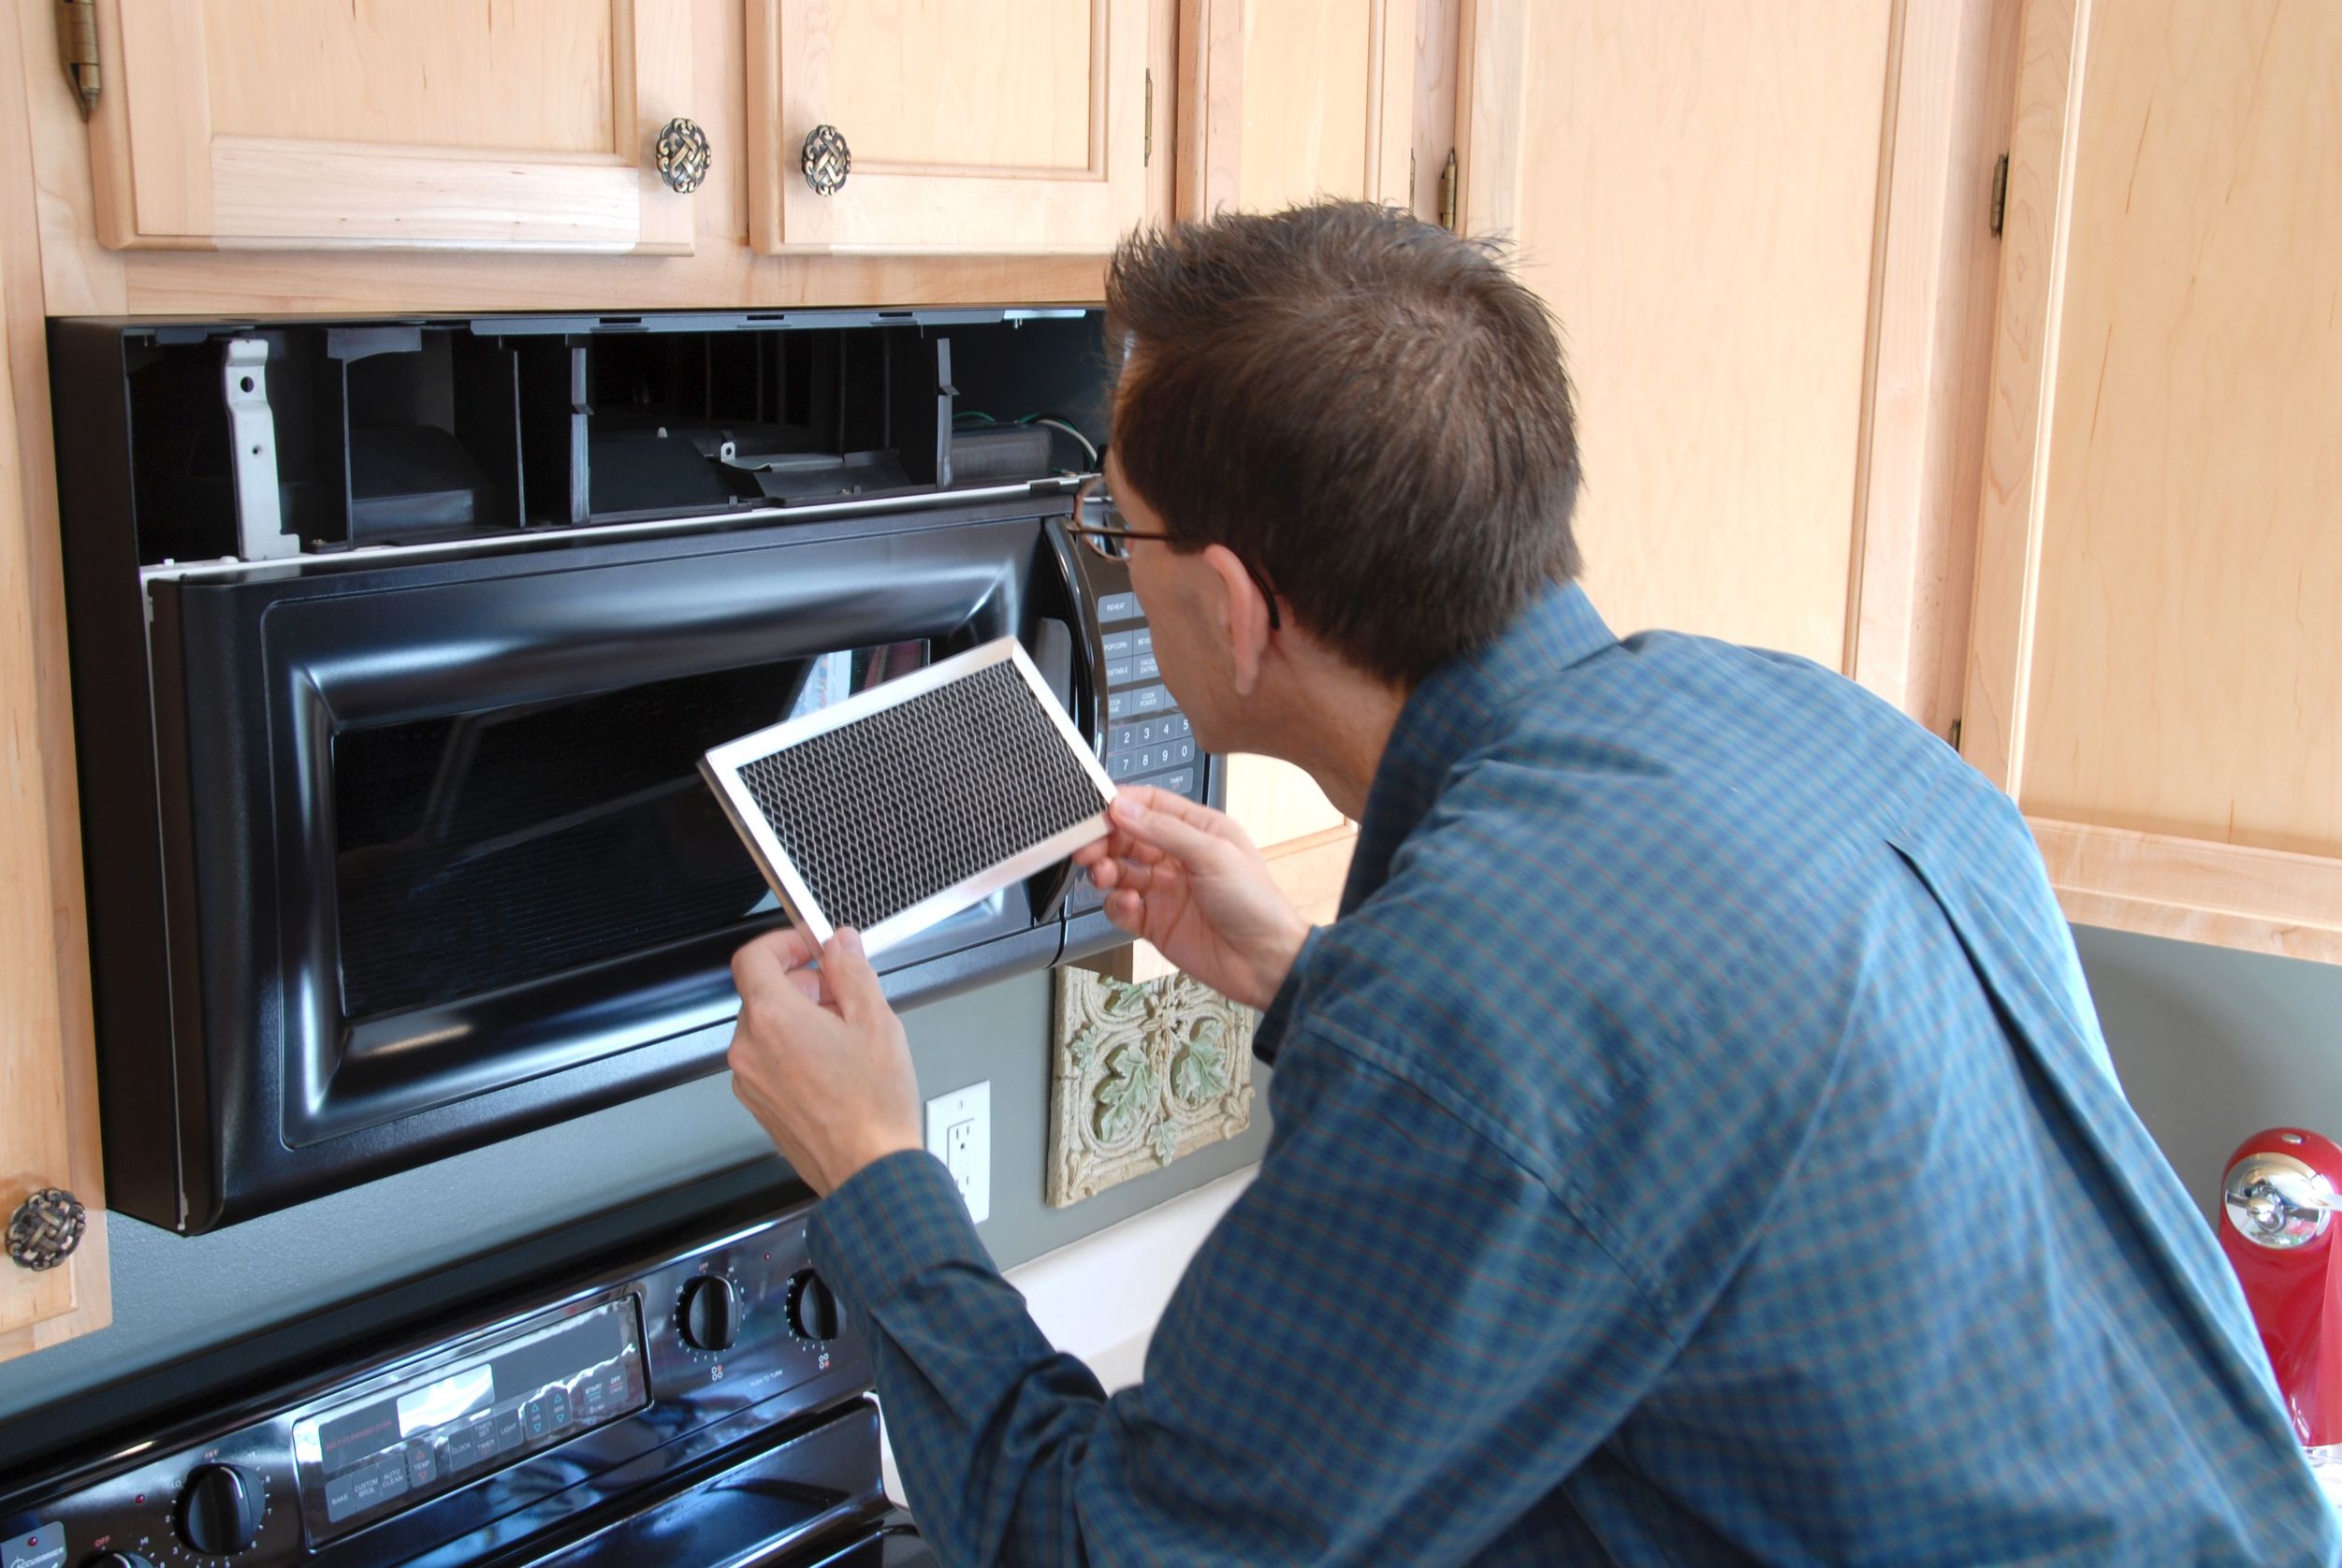 Reasons to Use a Professional to Repair Your Oven